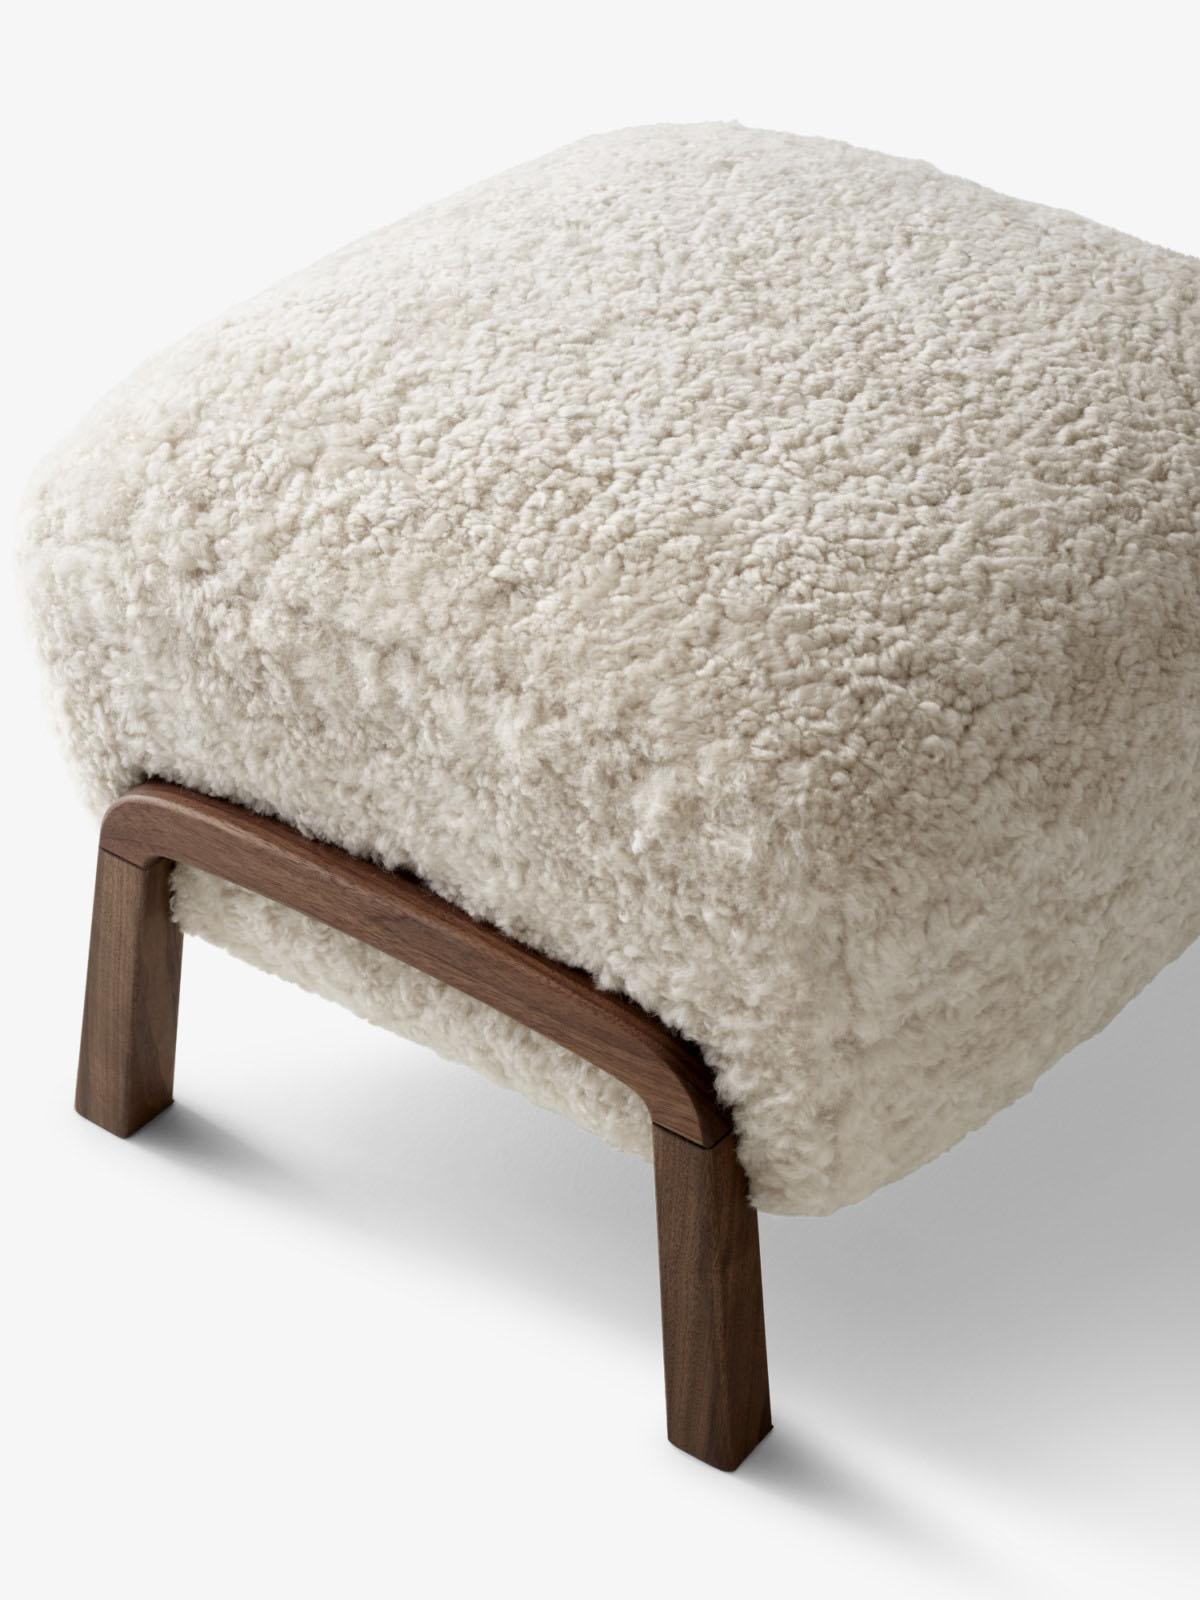 Set of 2 Wulff Atd2 & Pouf Atd3 in Sheepskin Moonlight/Walnut for & Tradition For Sale 1